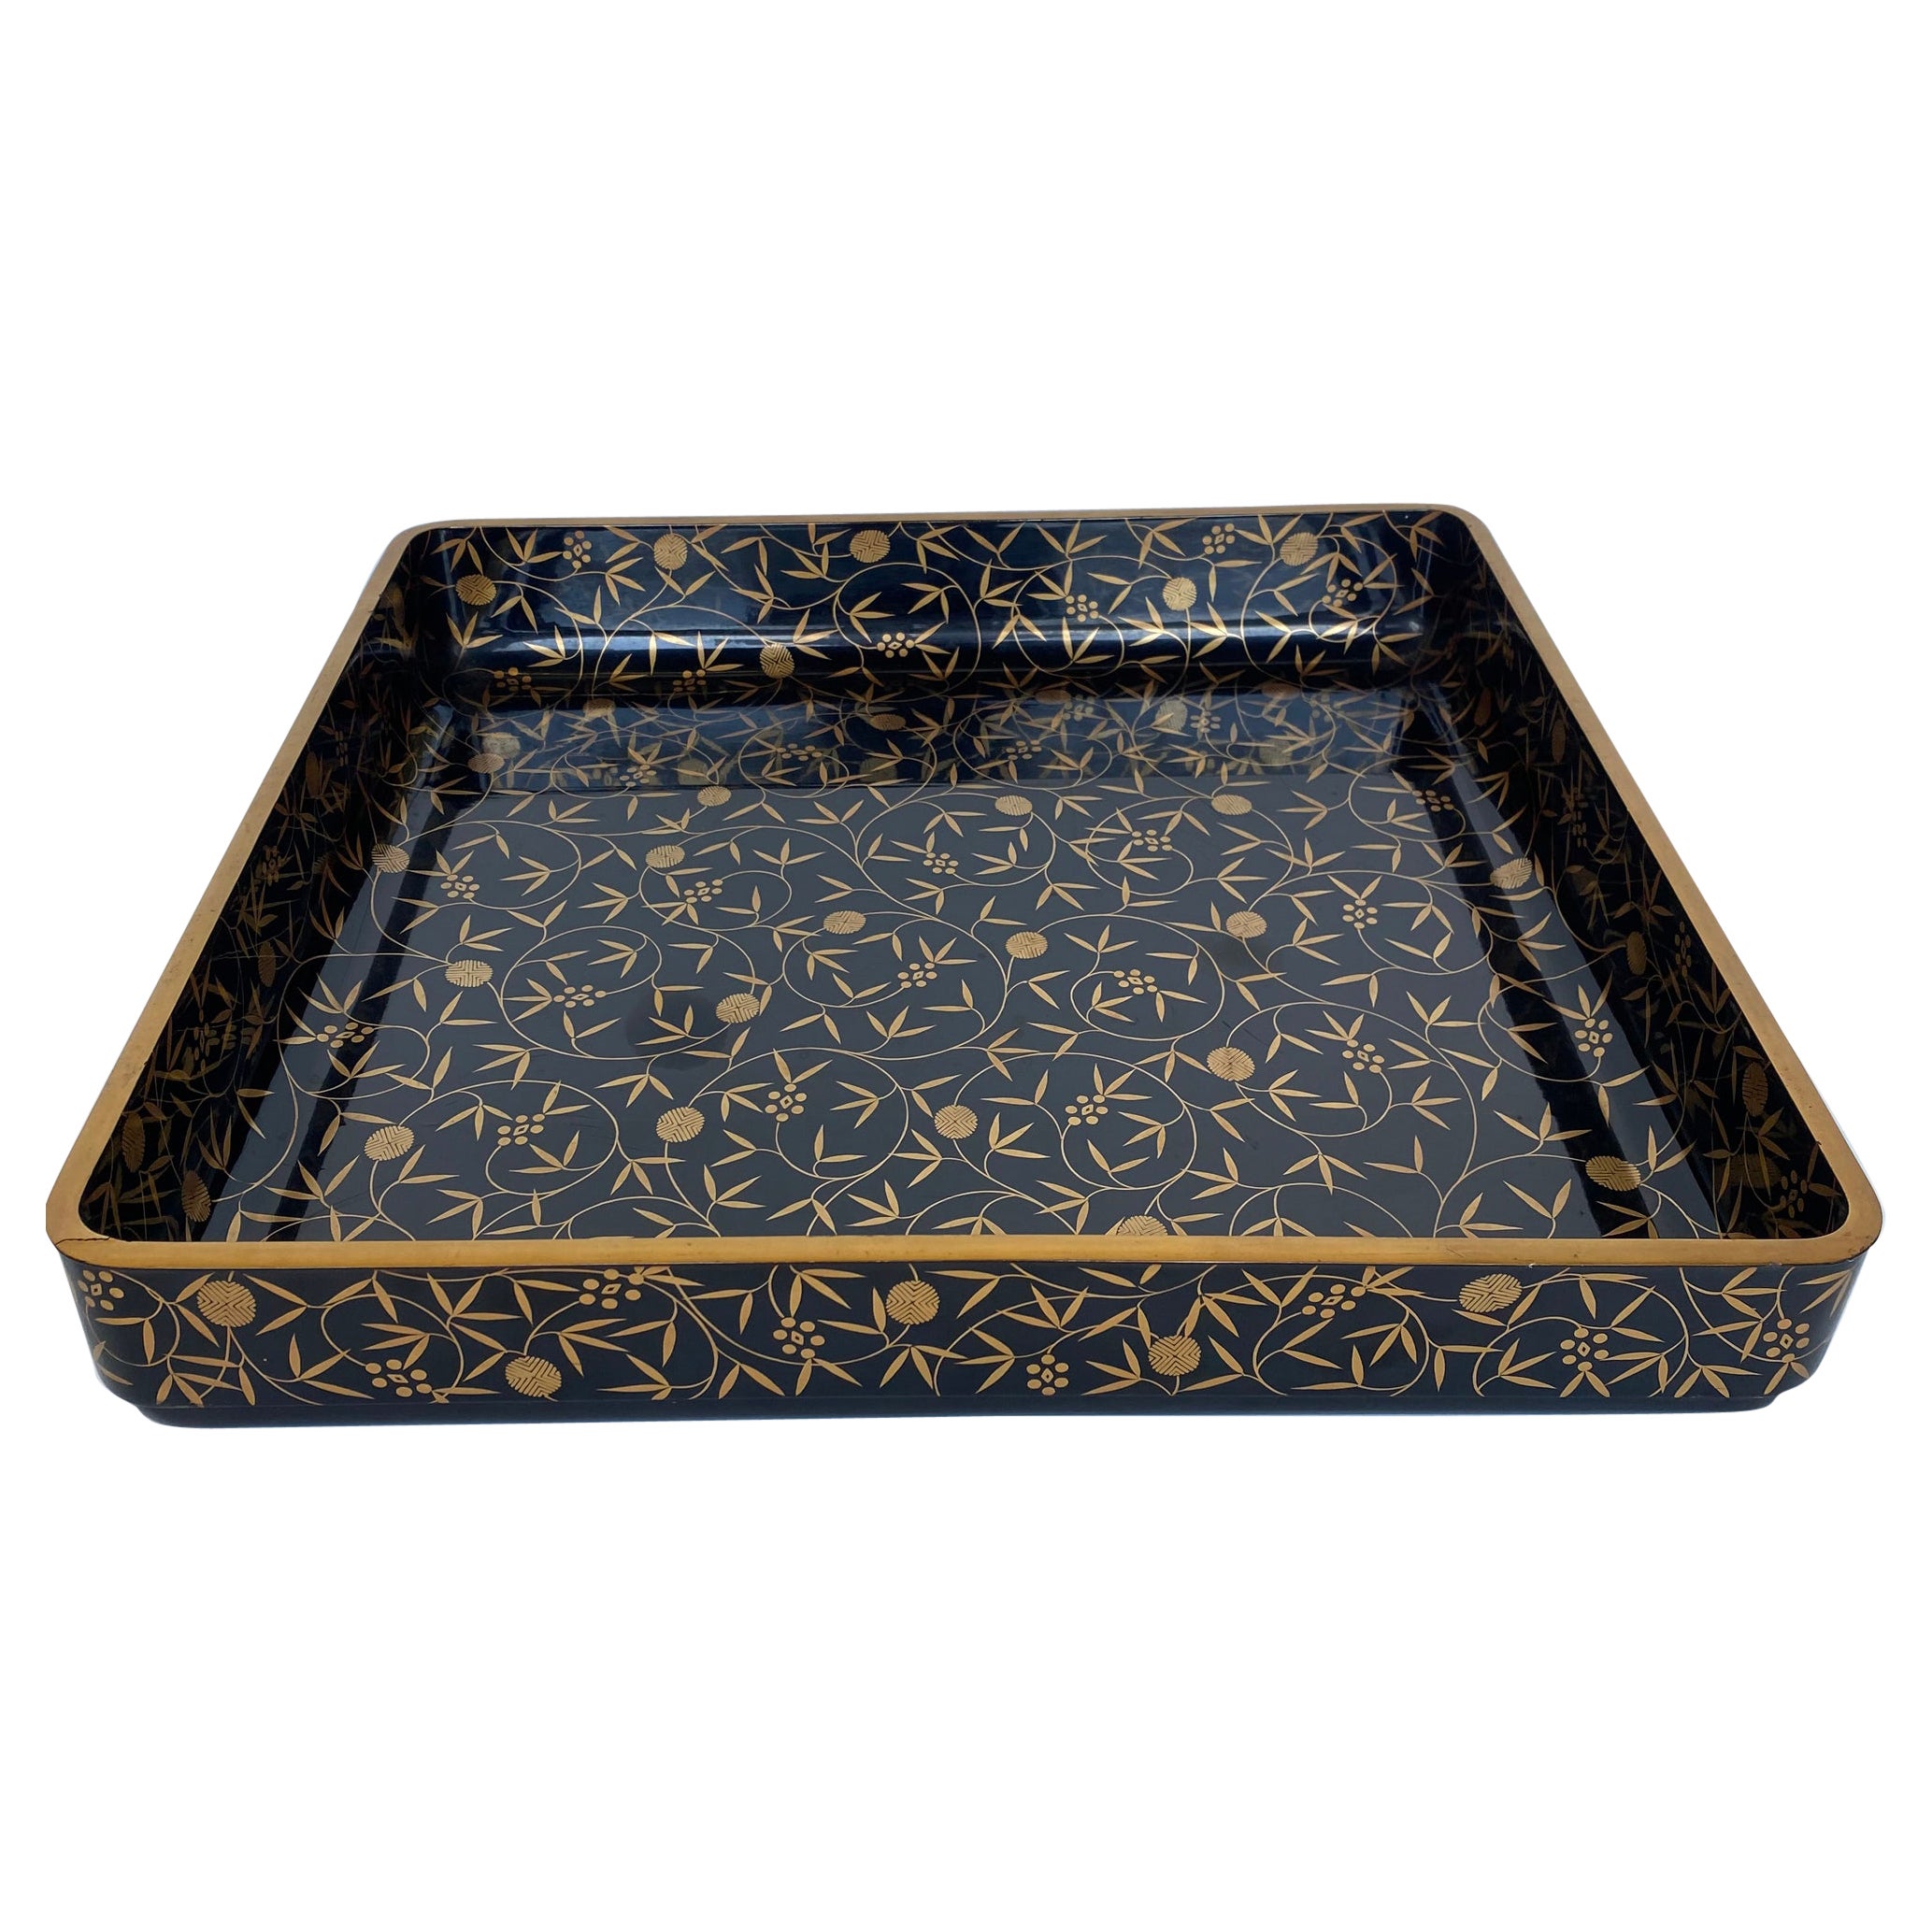 19th Century, Japanese Lacquer Large Scale Tray